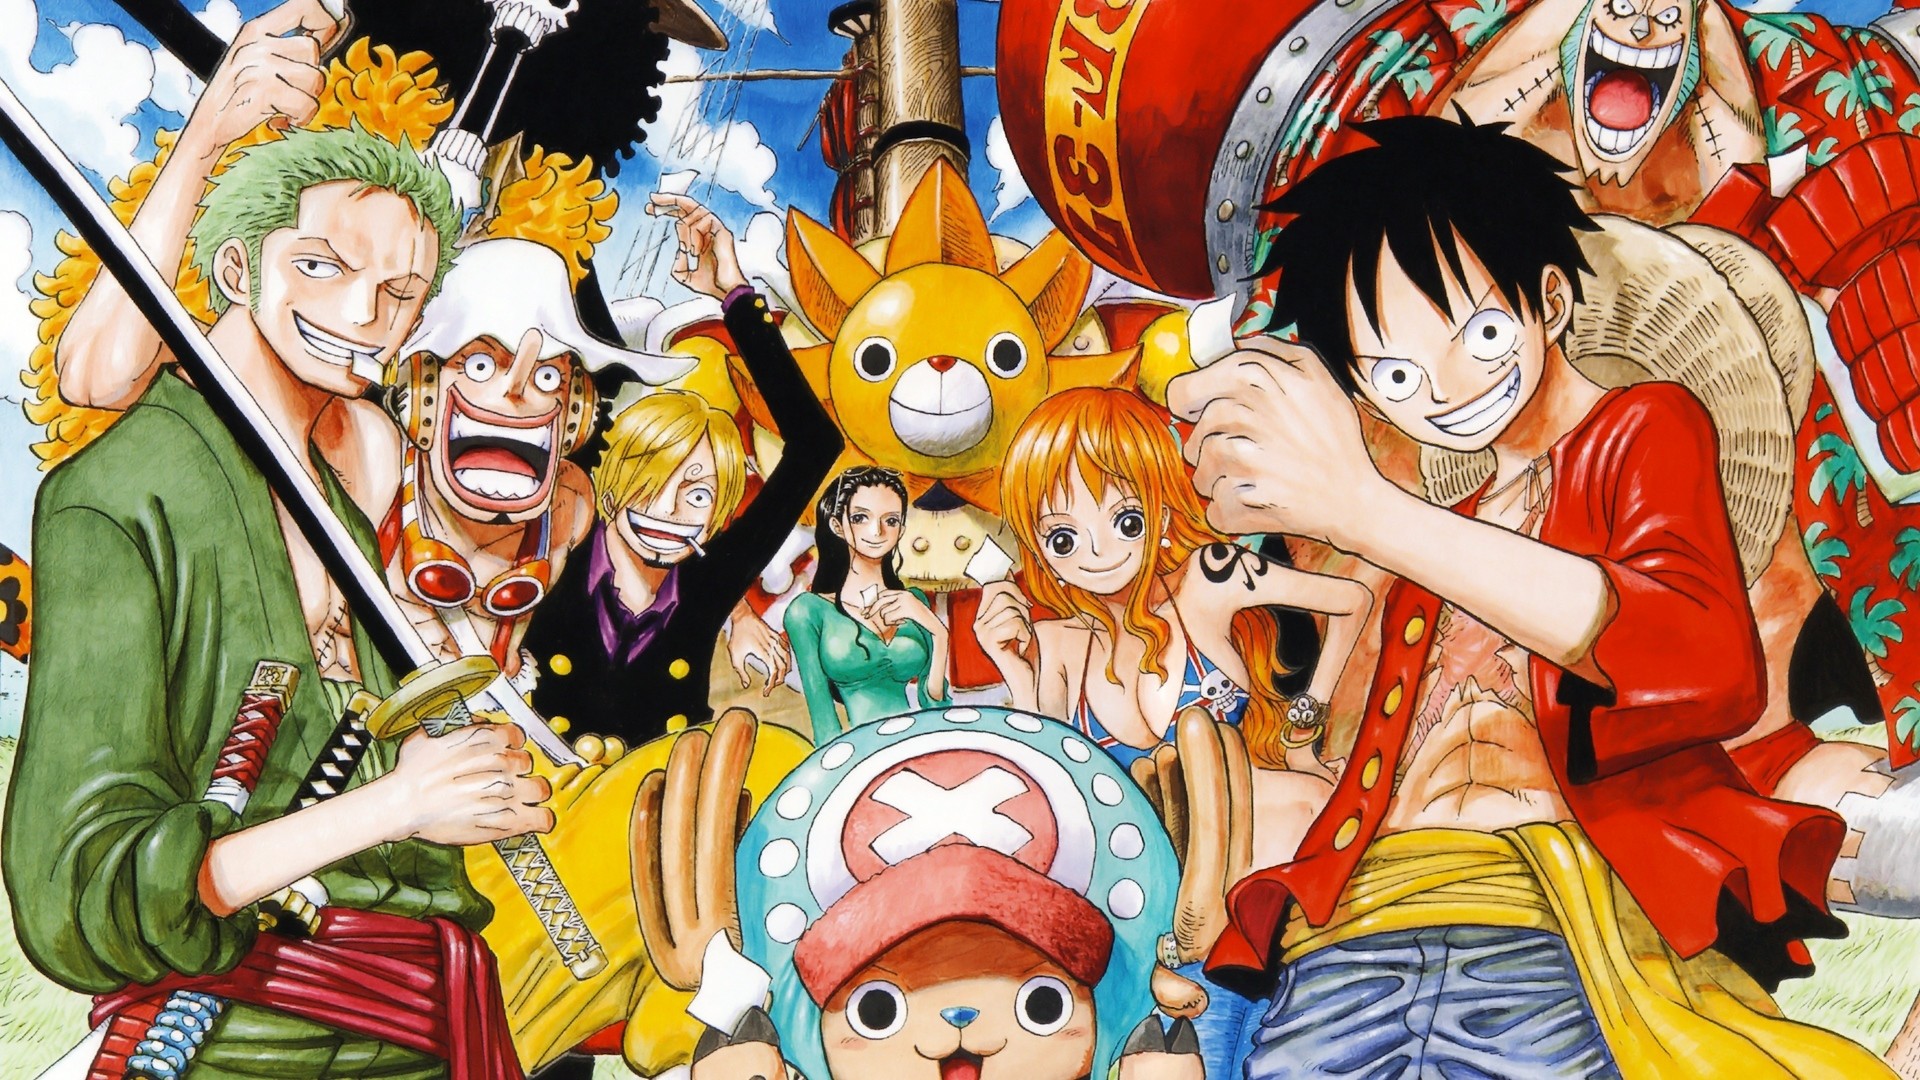 Desktop Wallpaper All Pirates, One Piece, Anime, Hd Image, Picture,  Background, 8d122a